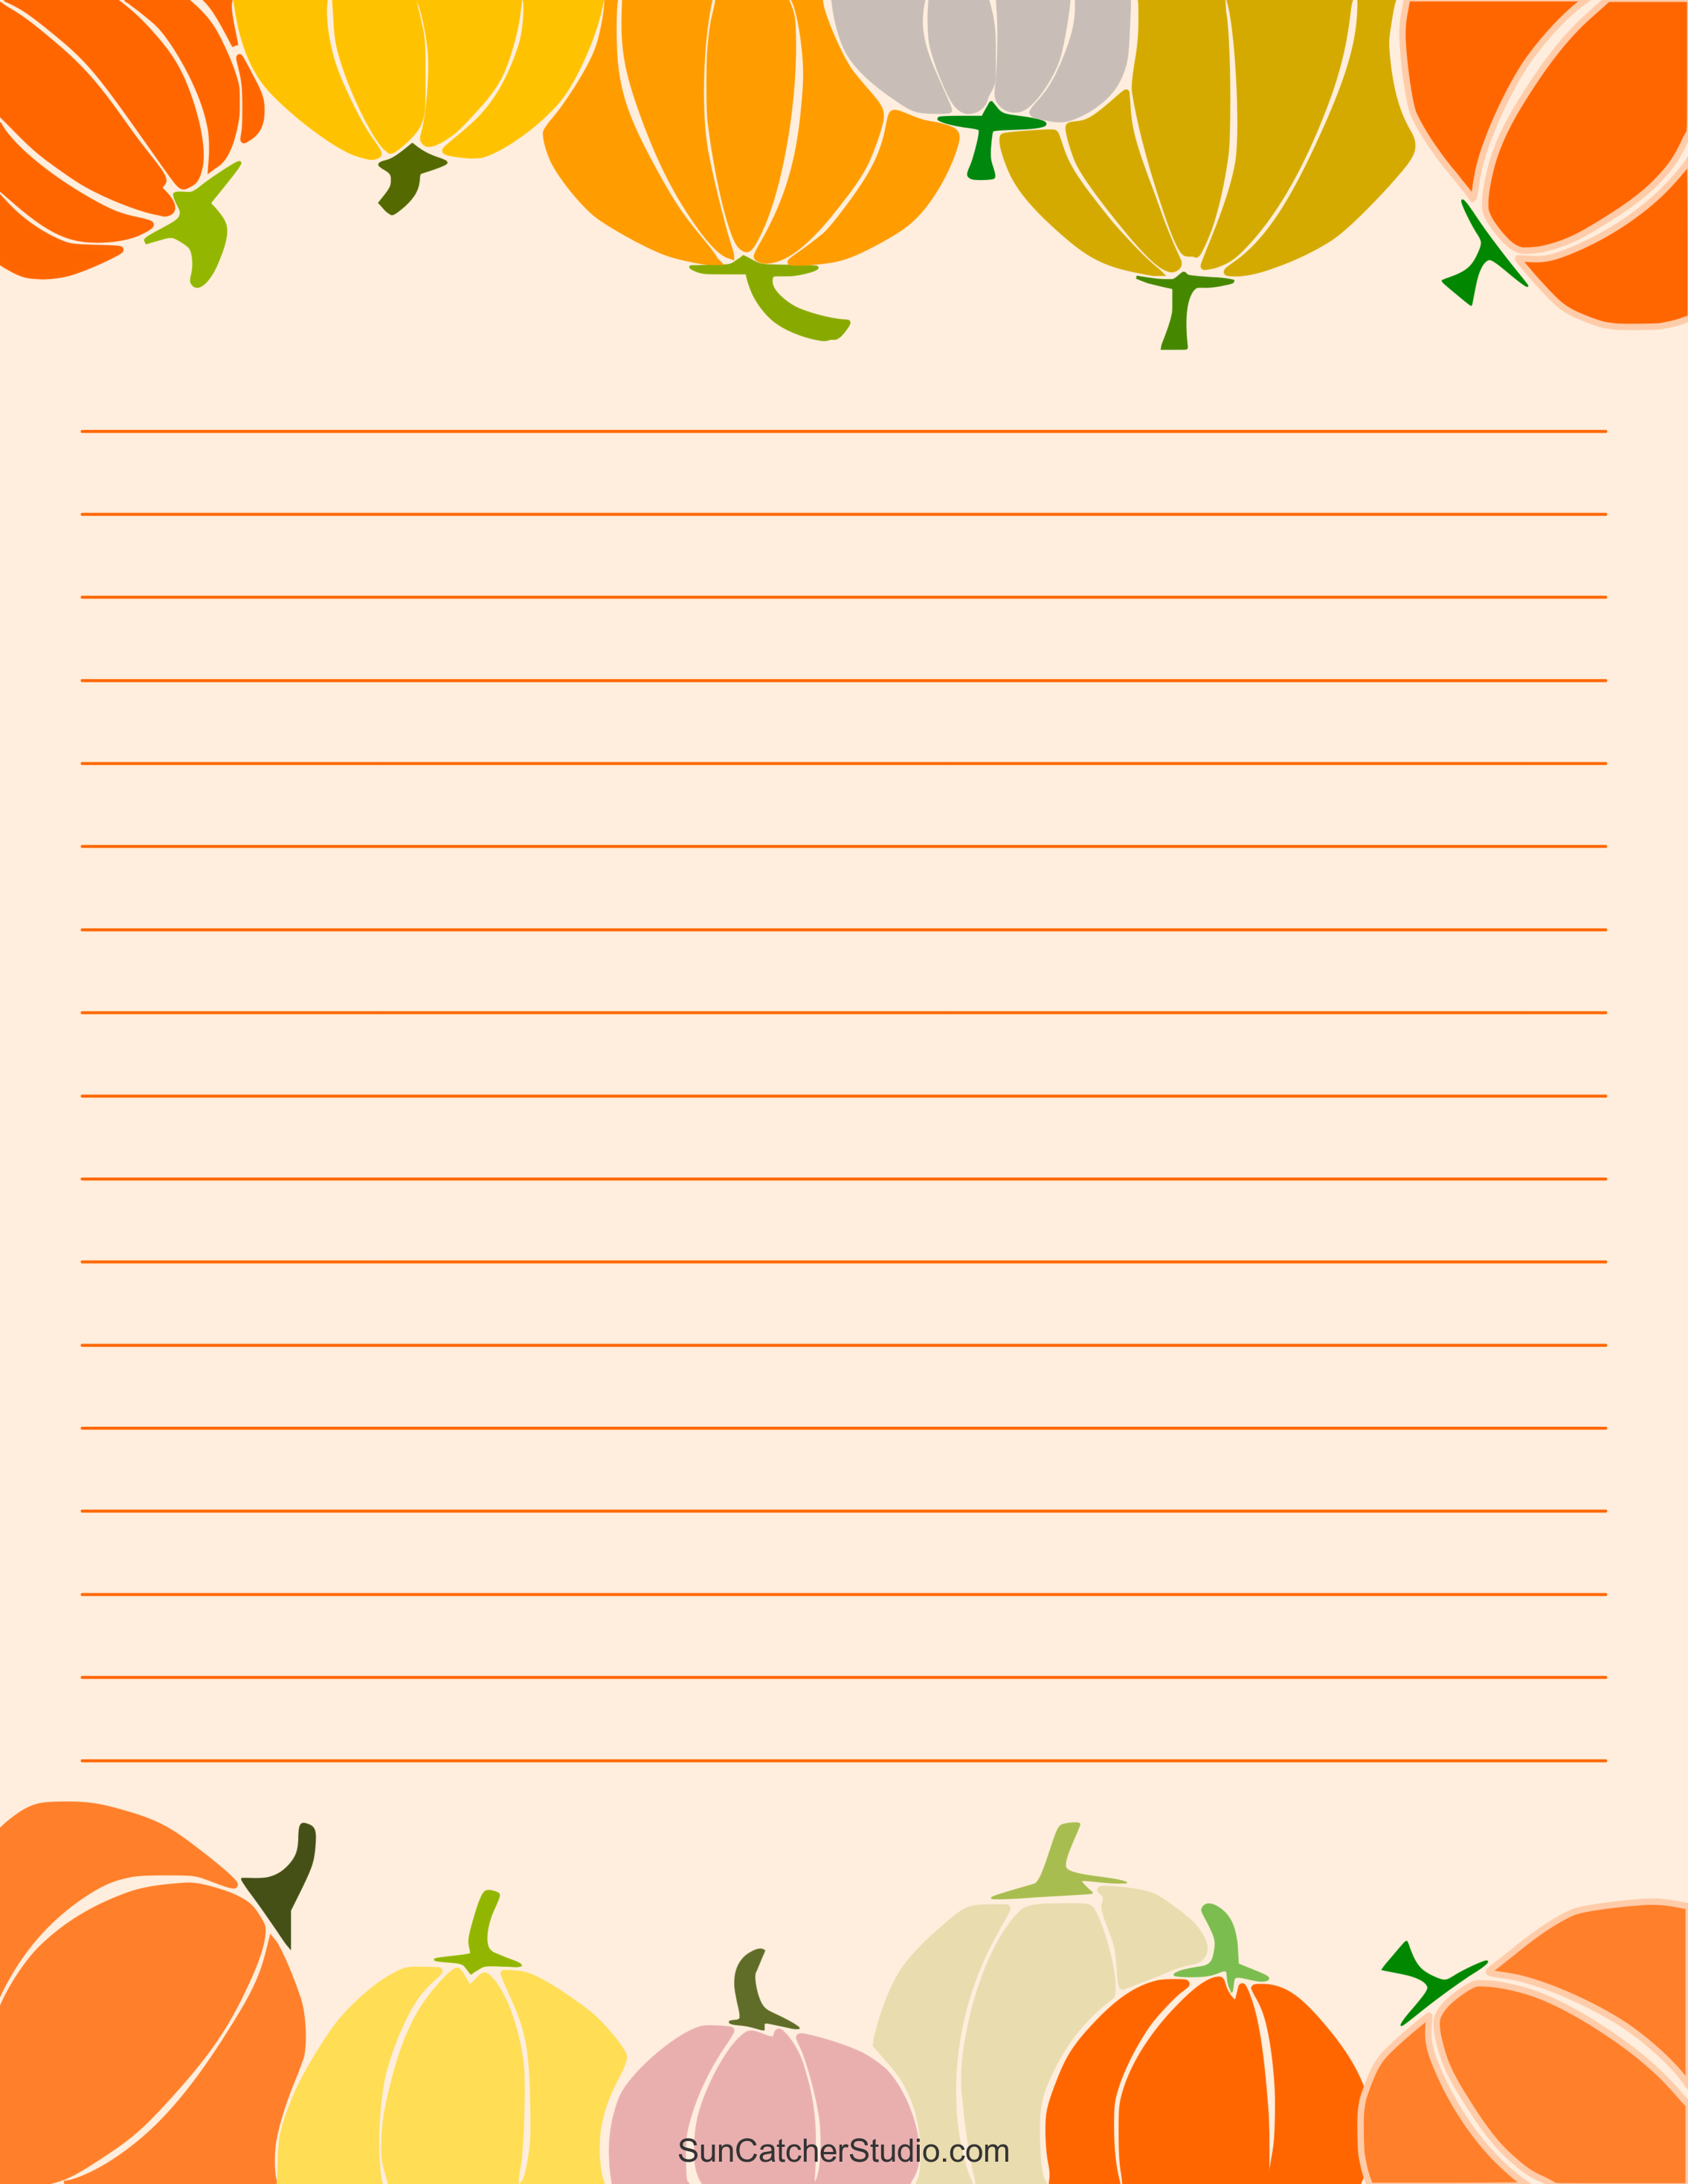 Free Printable Stationery and Lined Letter Writing Paper – DIY